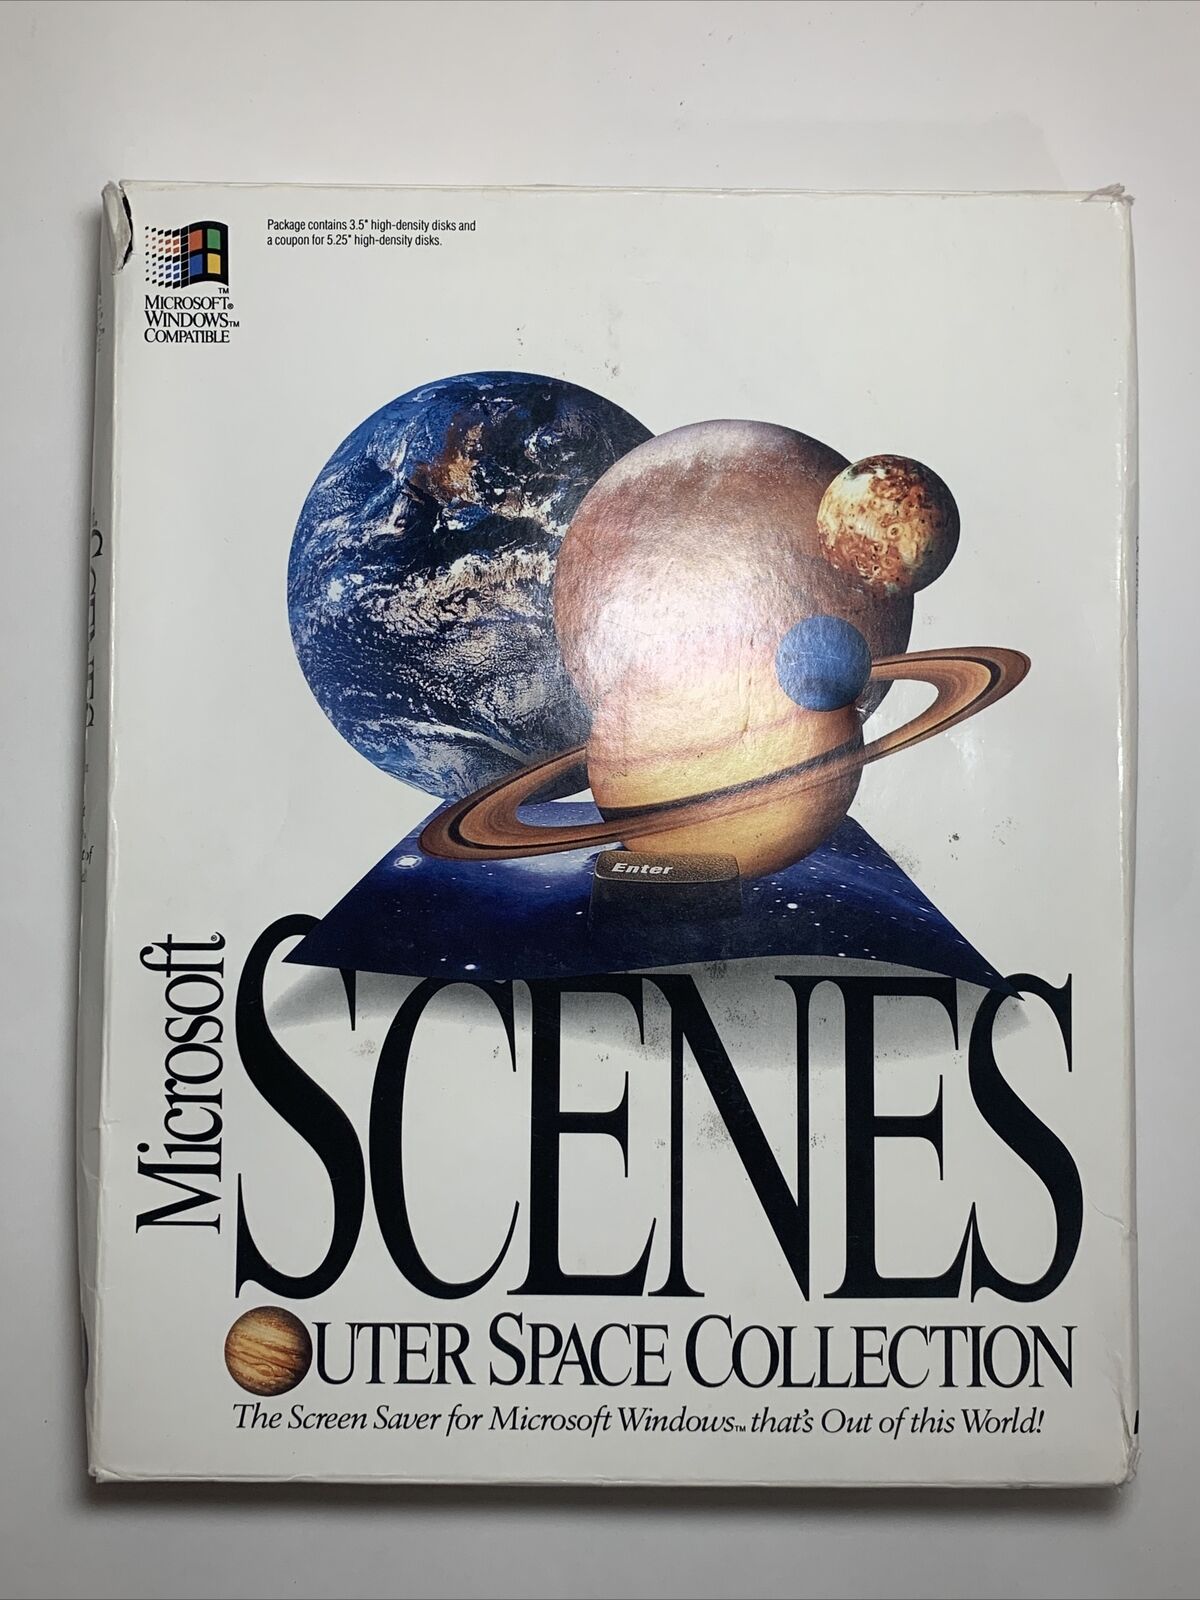 Microsoft Scenes Outer Space Collection, The Screen Saver For Microsoft Windows